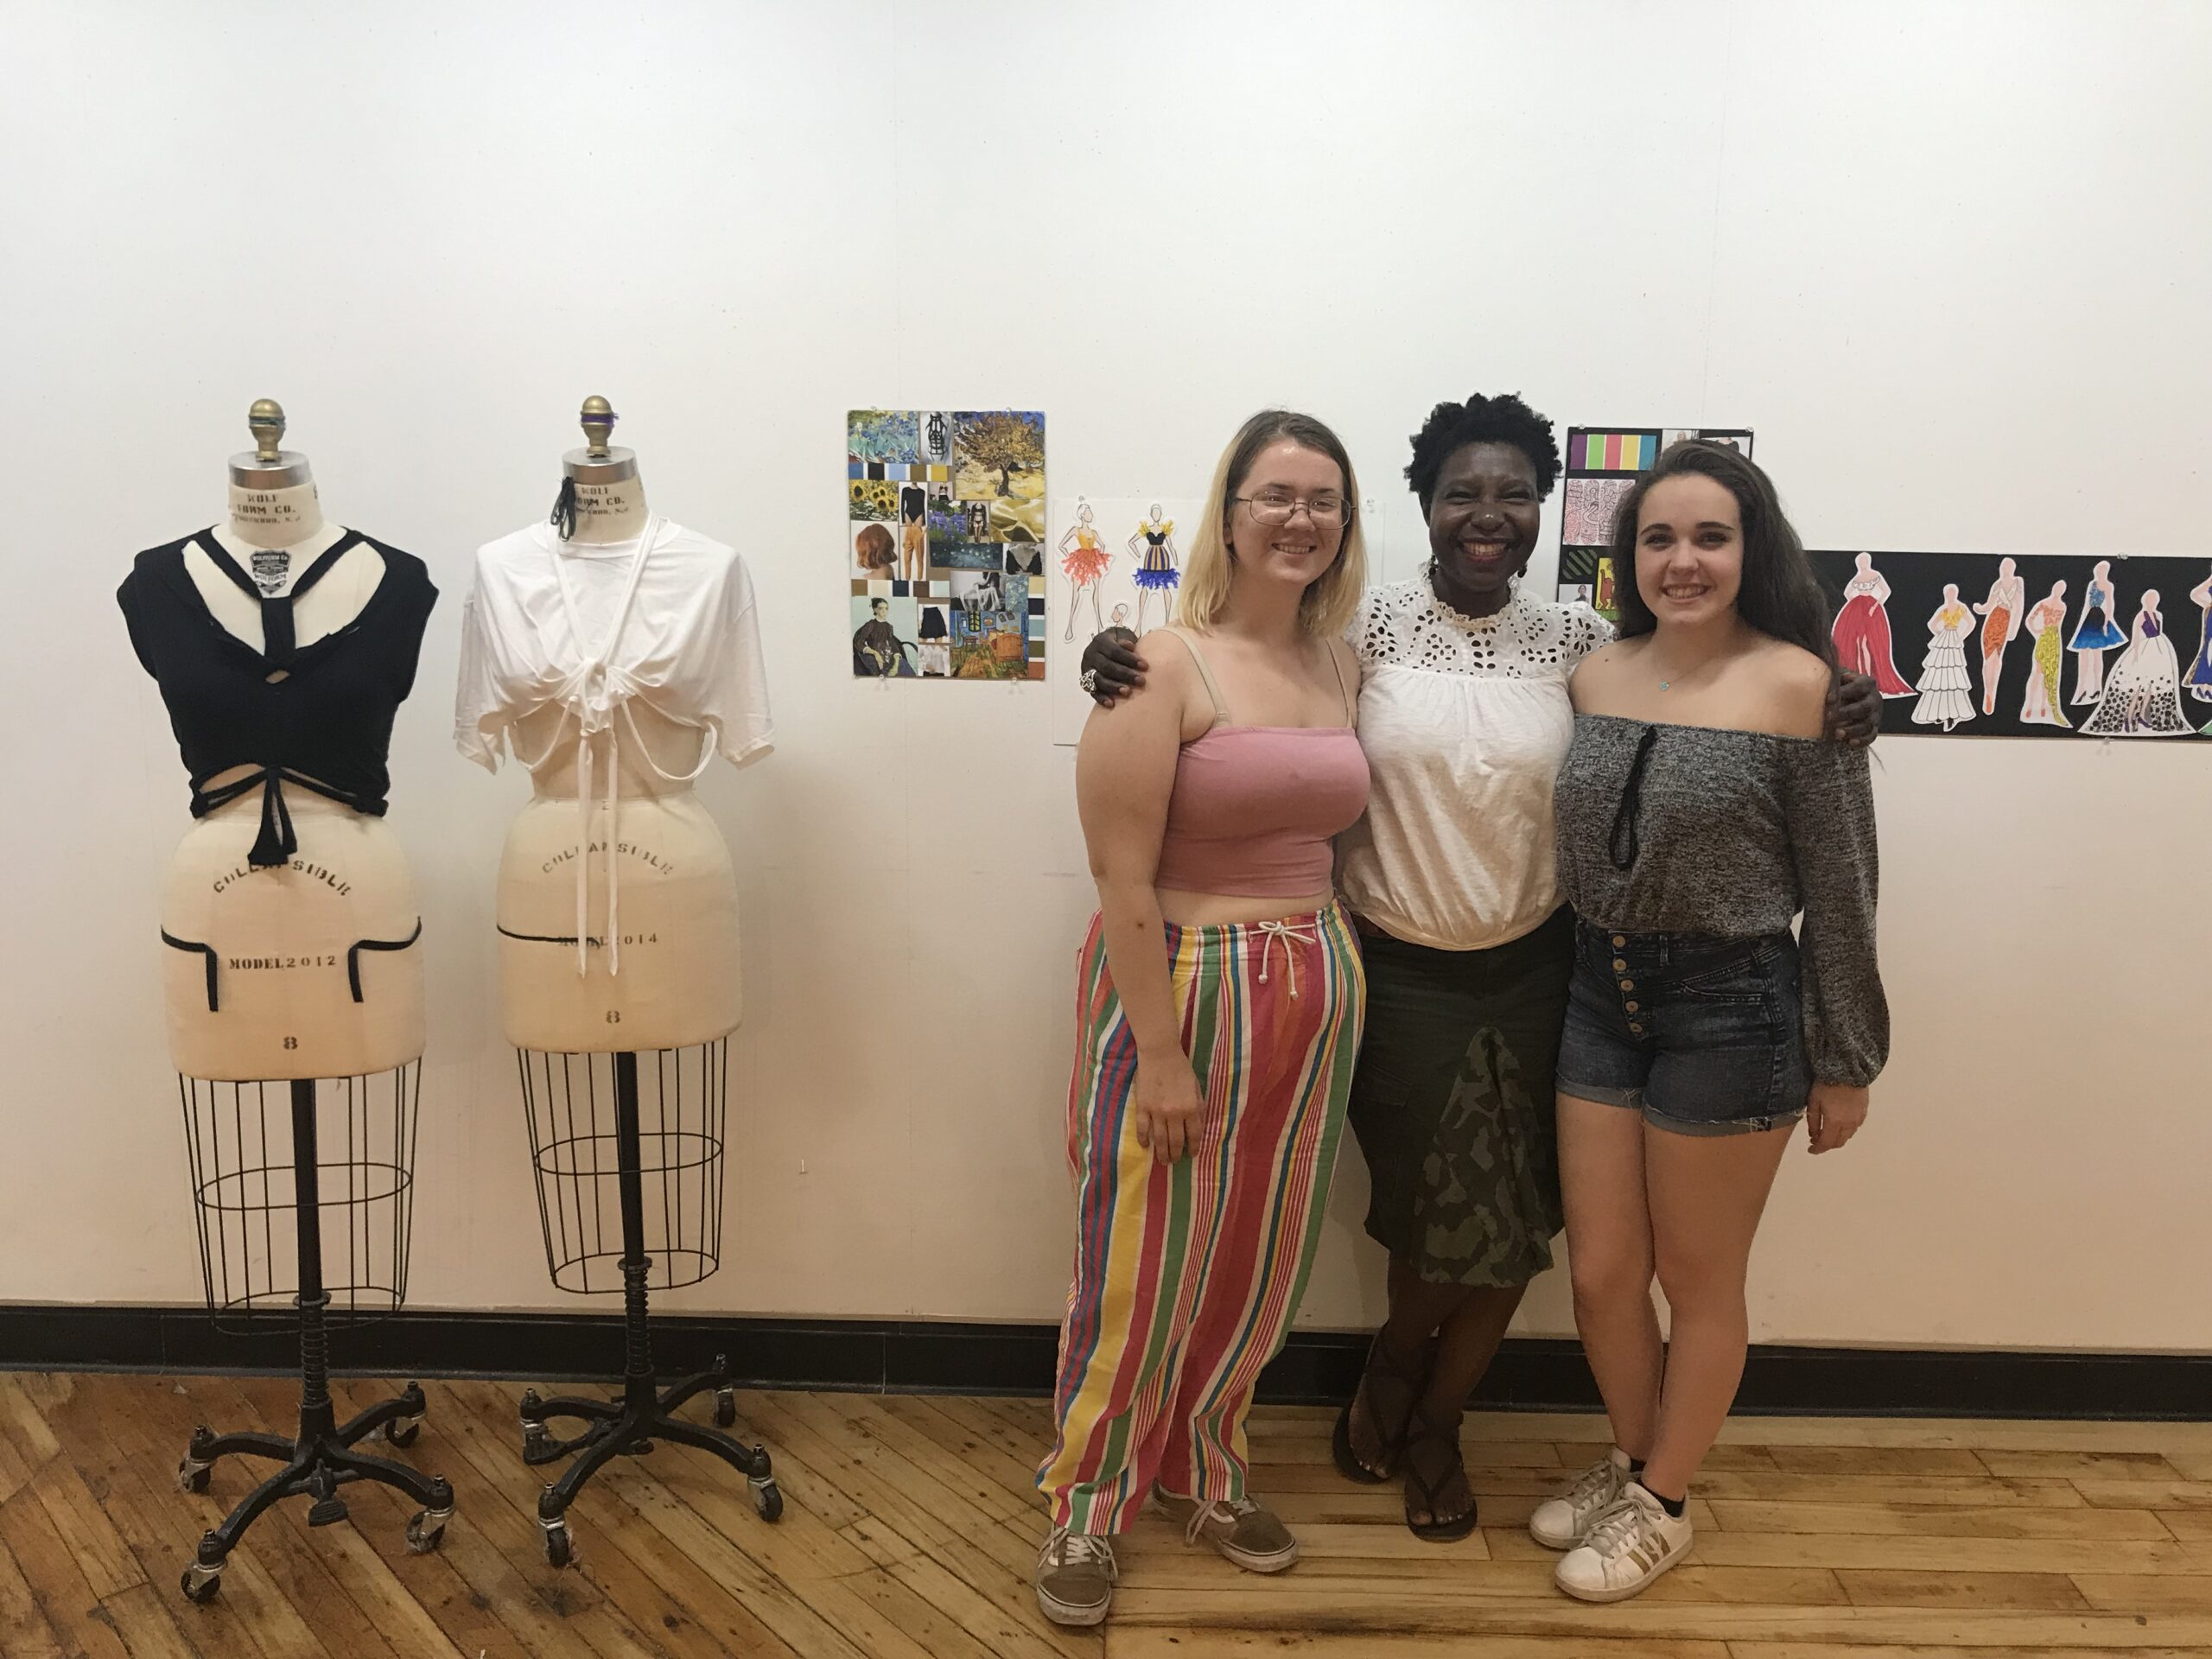 Three students stands in front of their fashion design projects, with two mannequins on their right and a set of fashion sketches behind them on the wall.